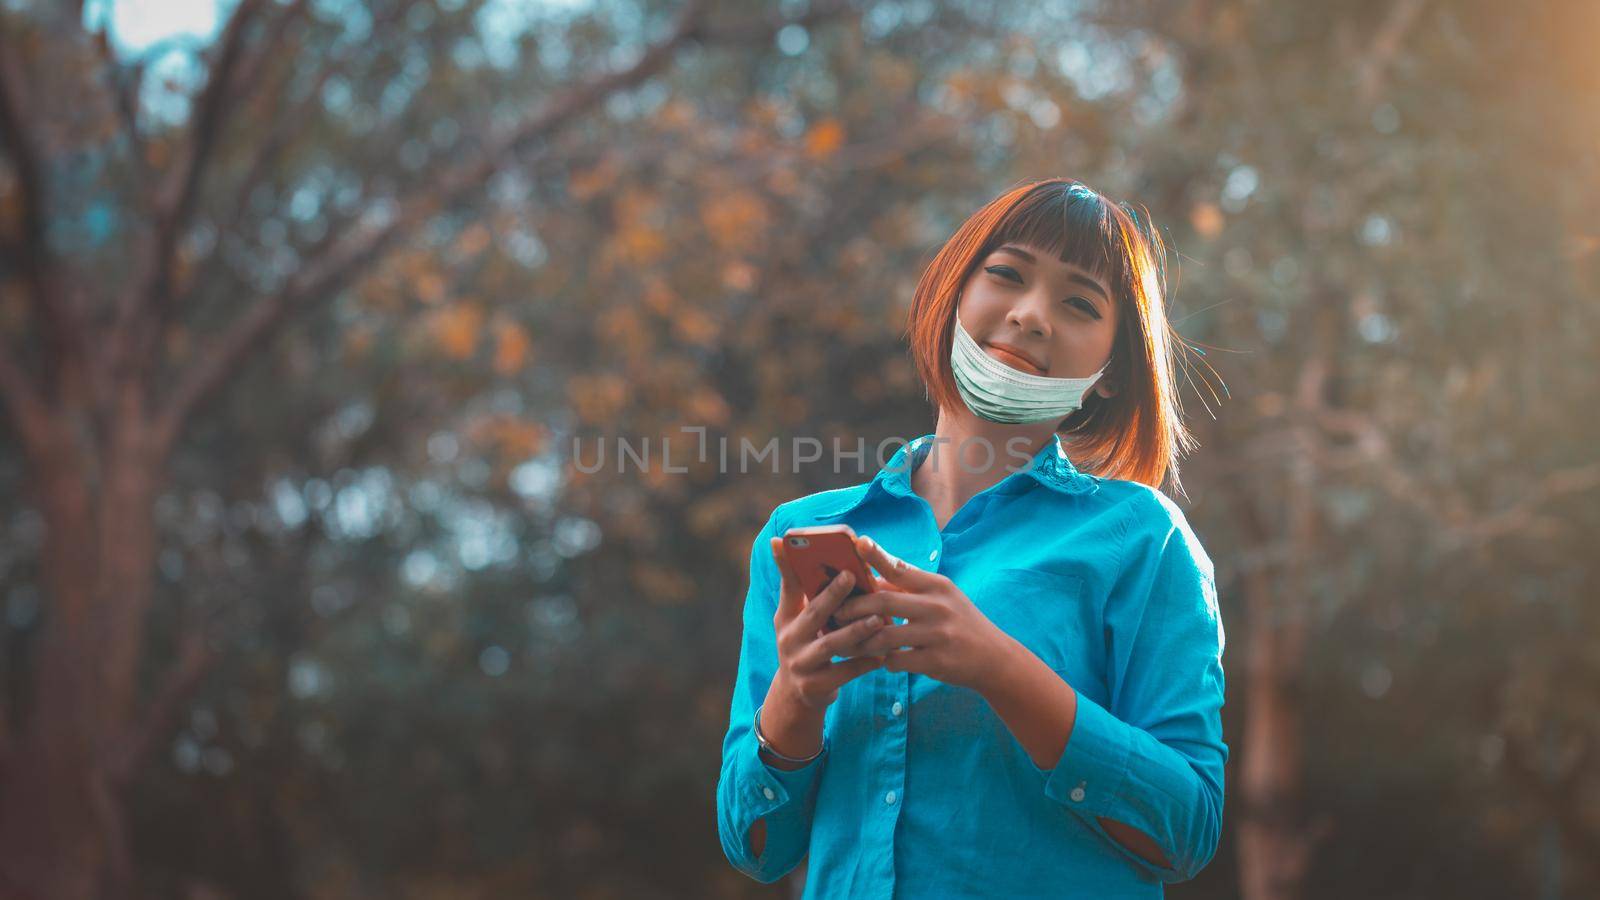 Communication of modern society After the virus outbreak. woman wearing a mask on park, new normal of life